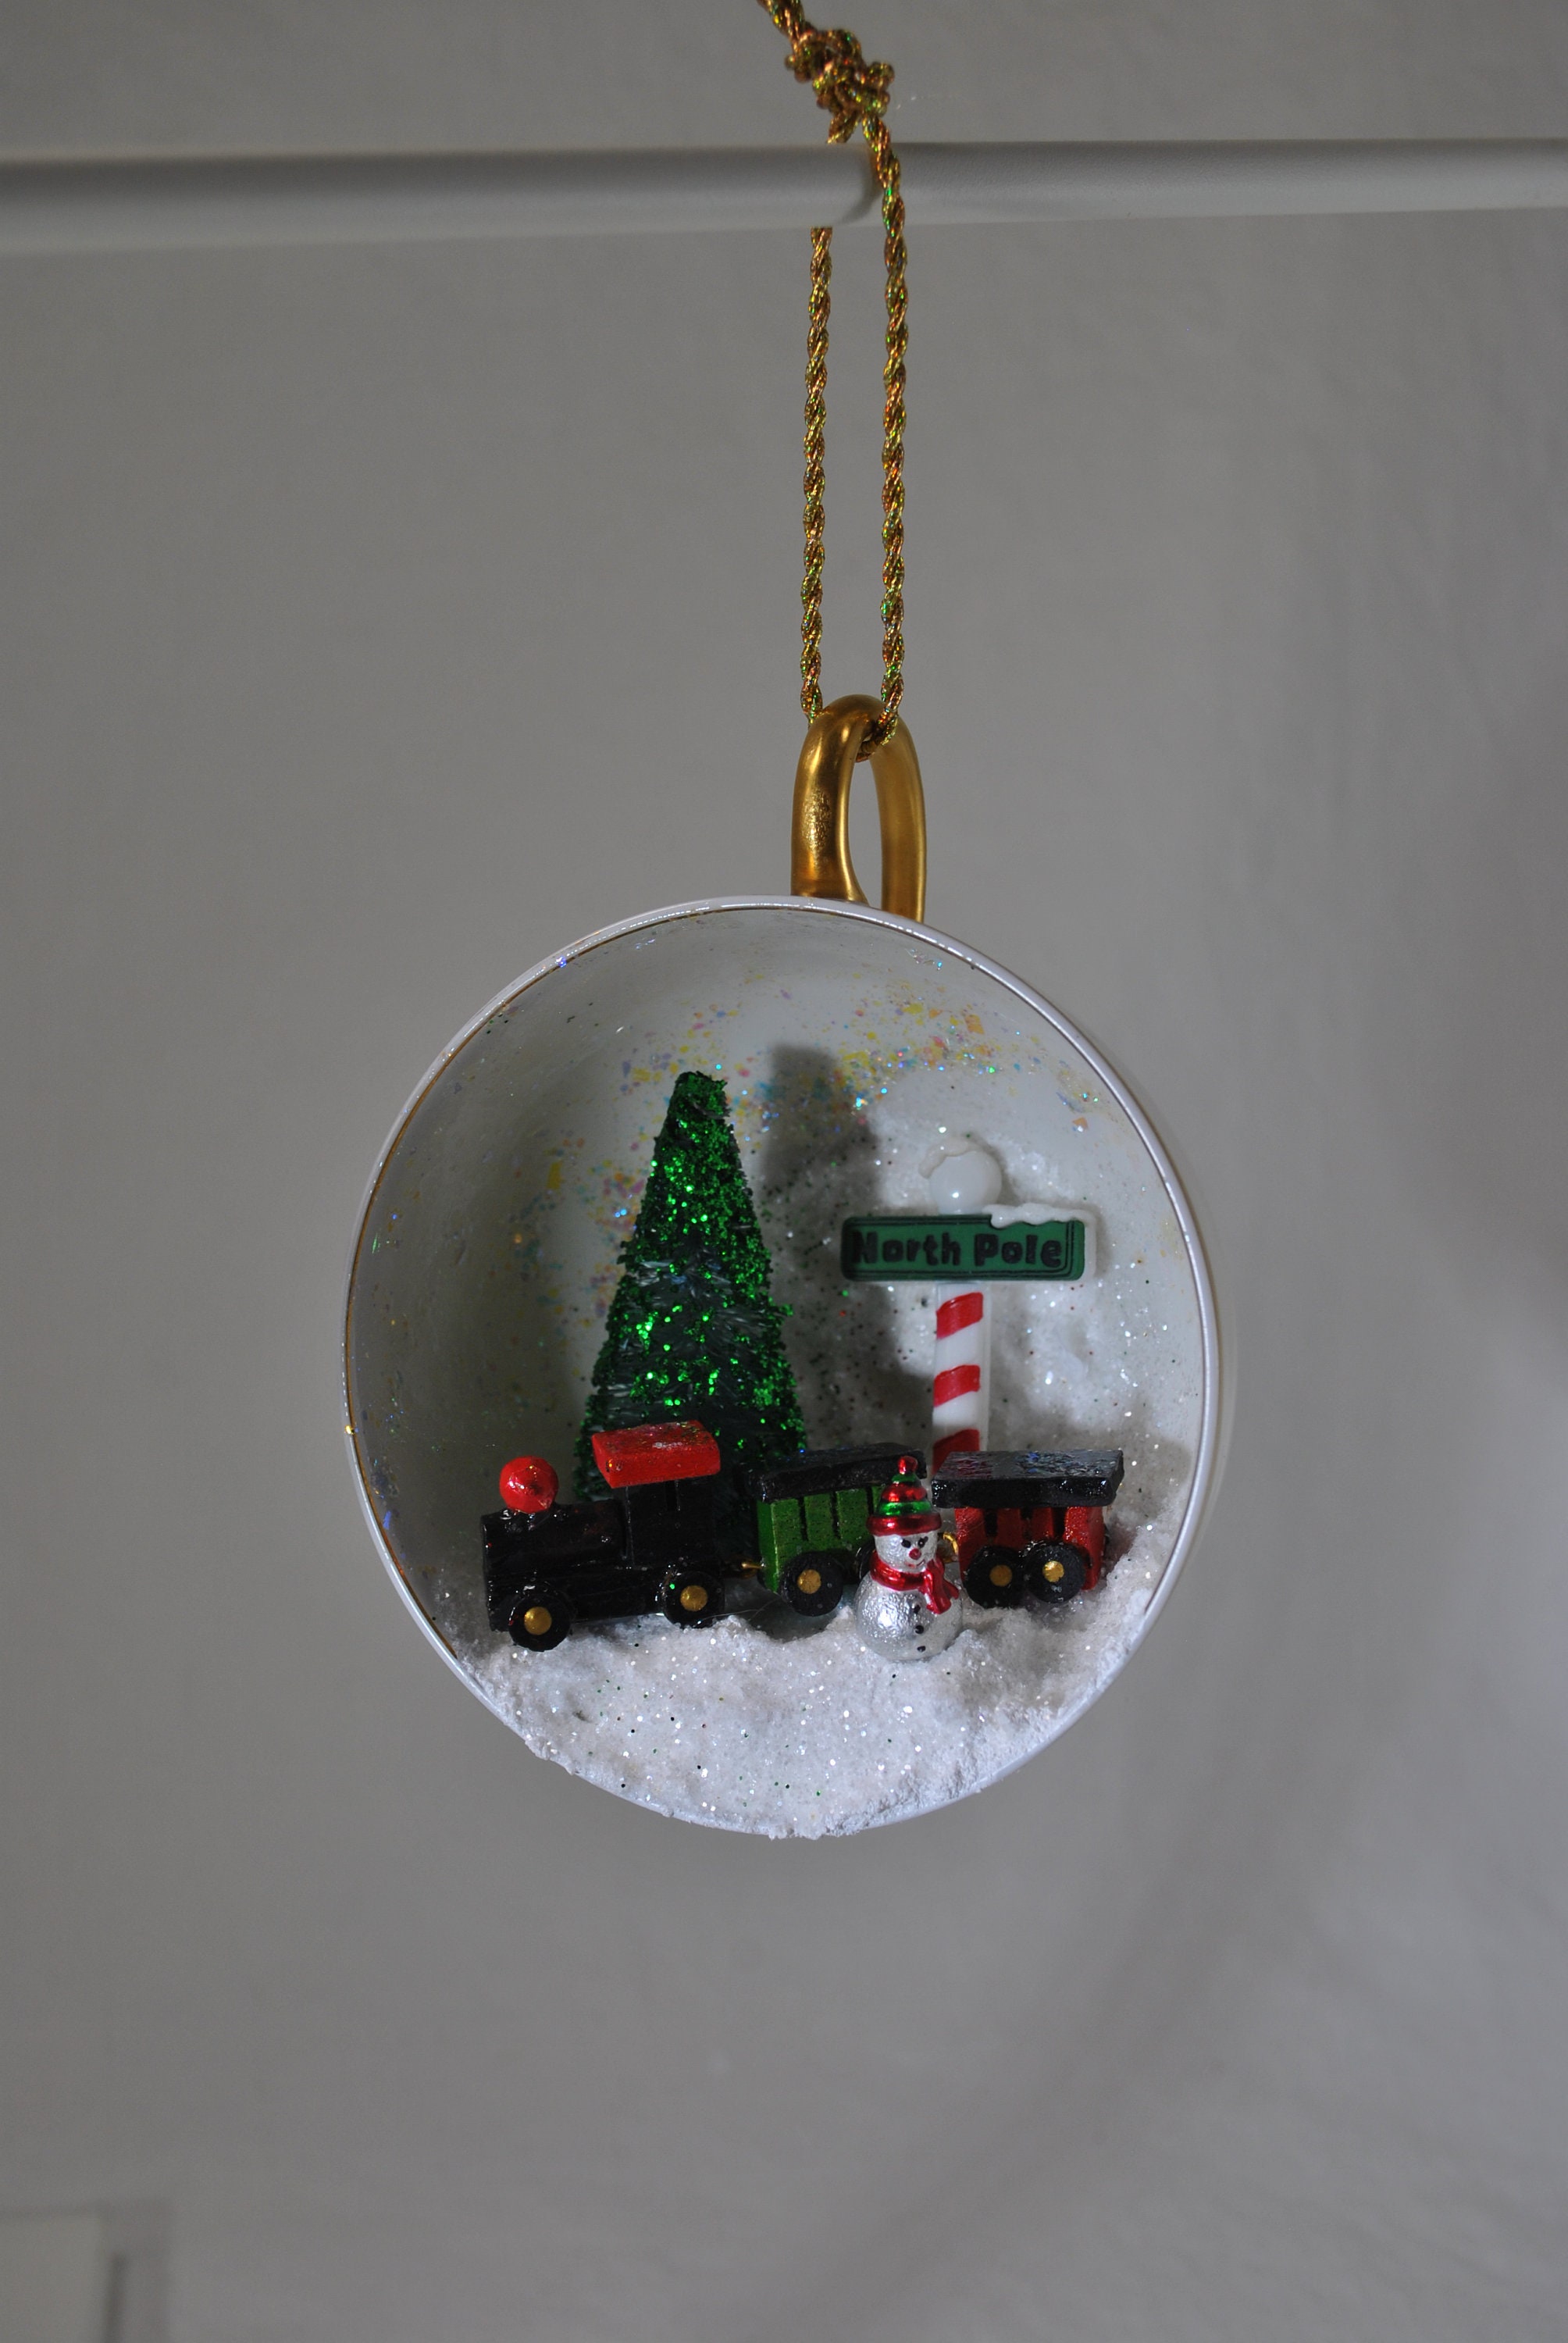 Tiny Train Travels to the North Pole in a Vintage Teacup Full | Etsy